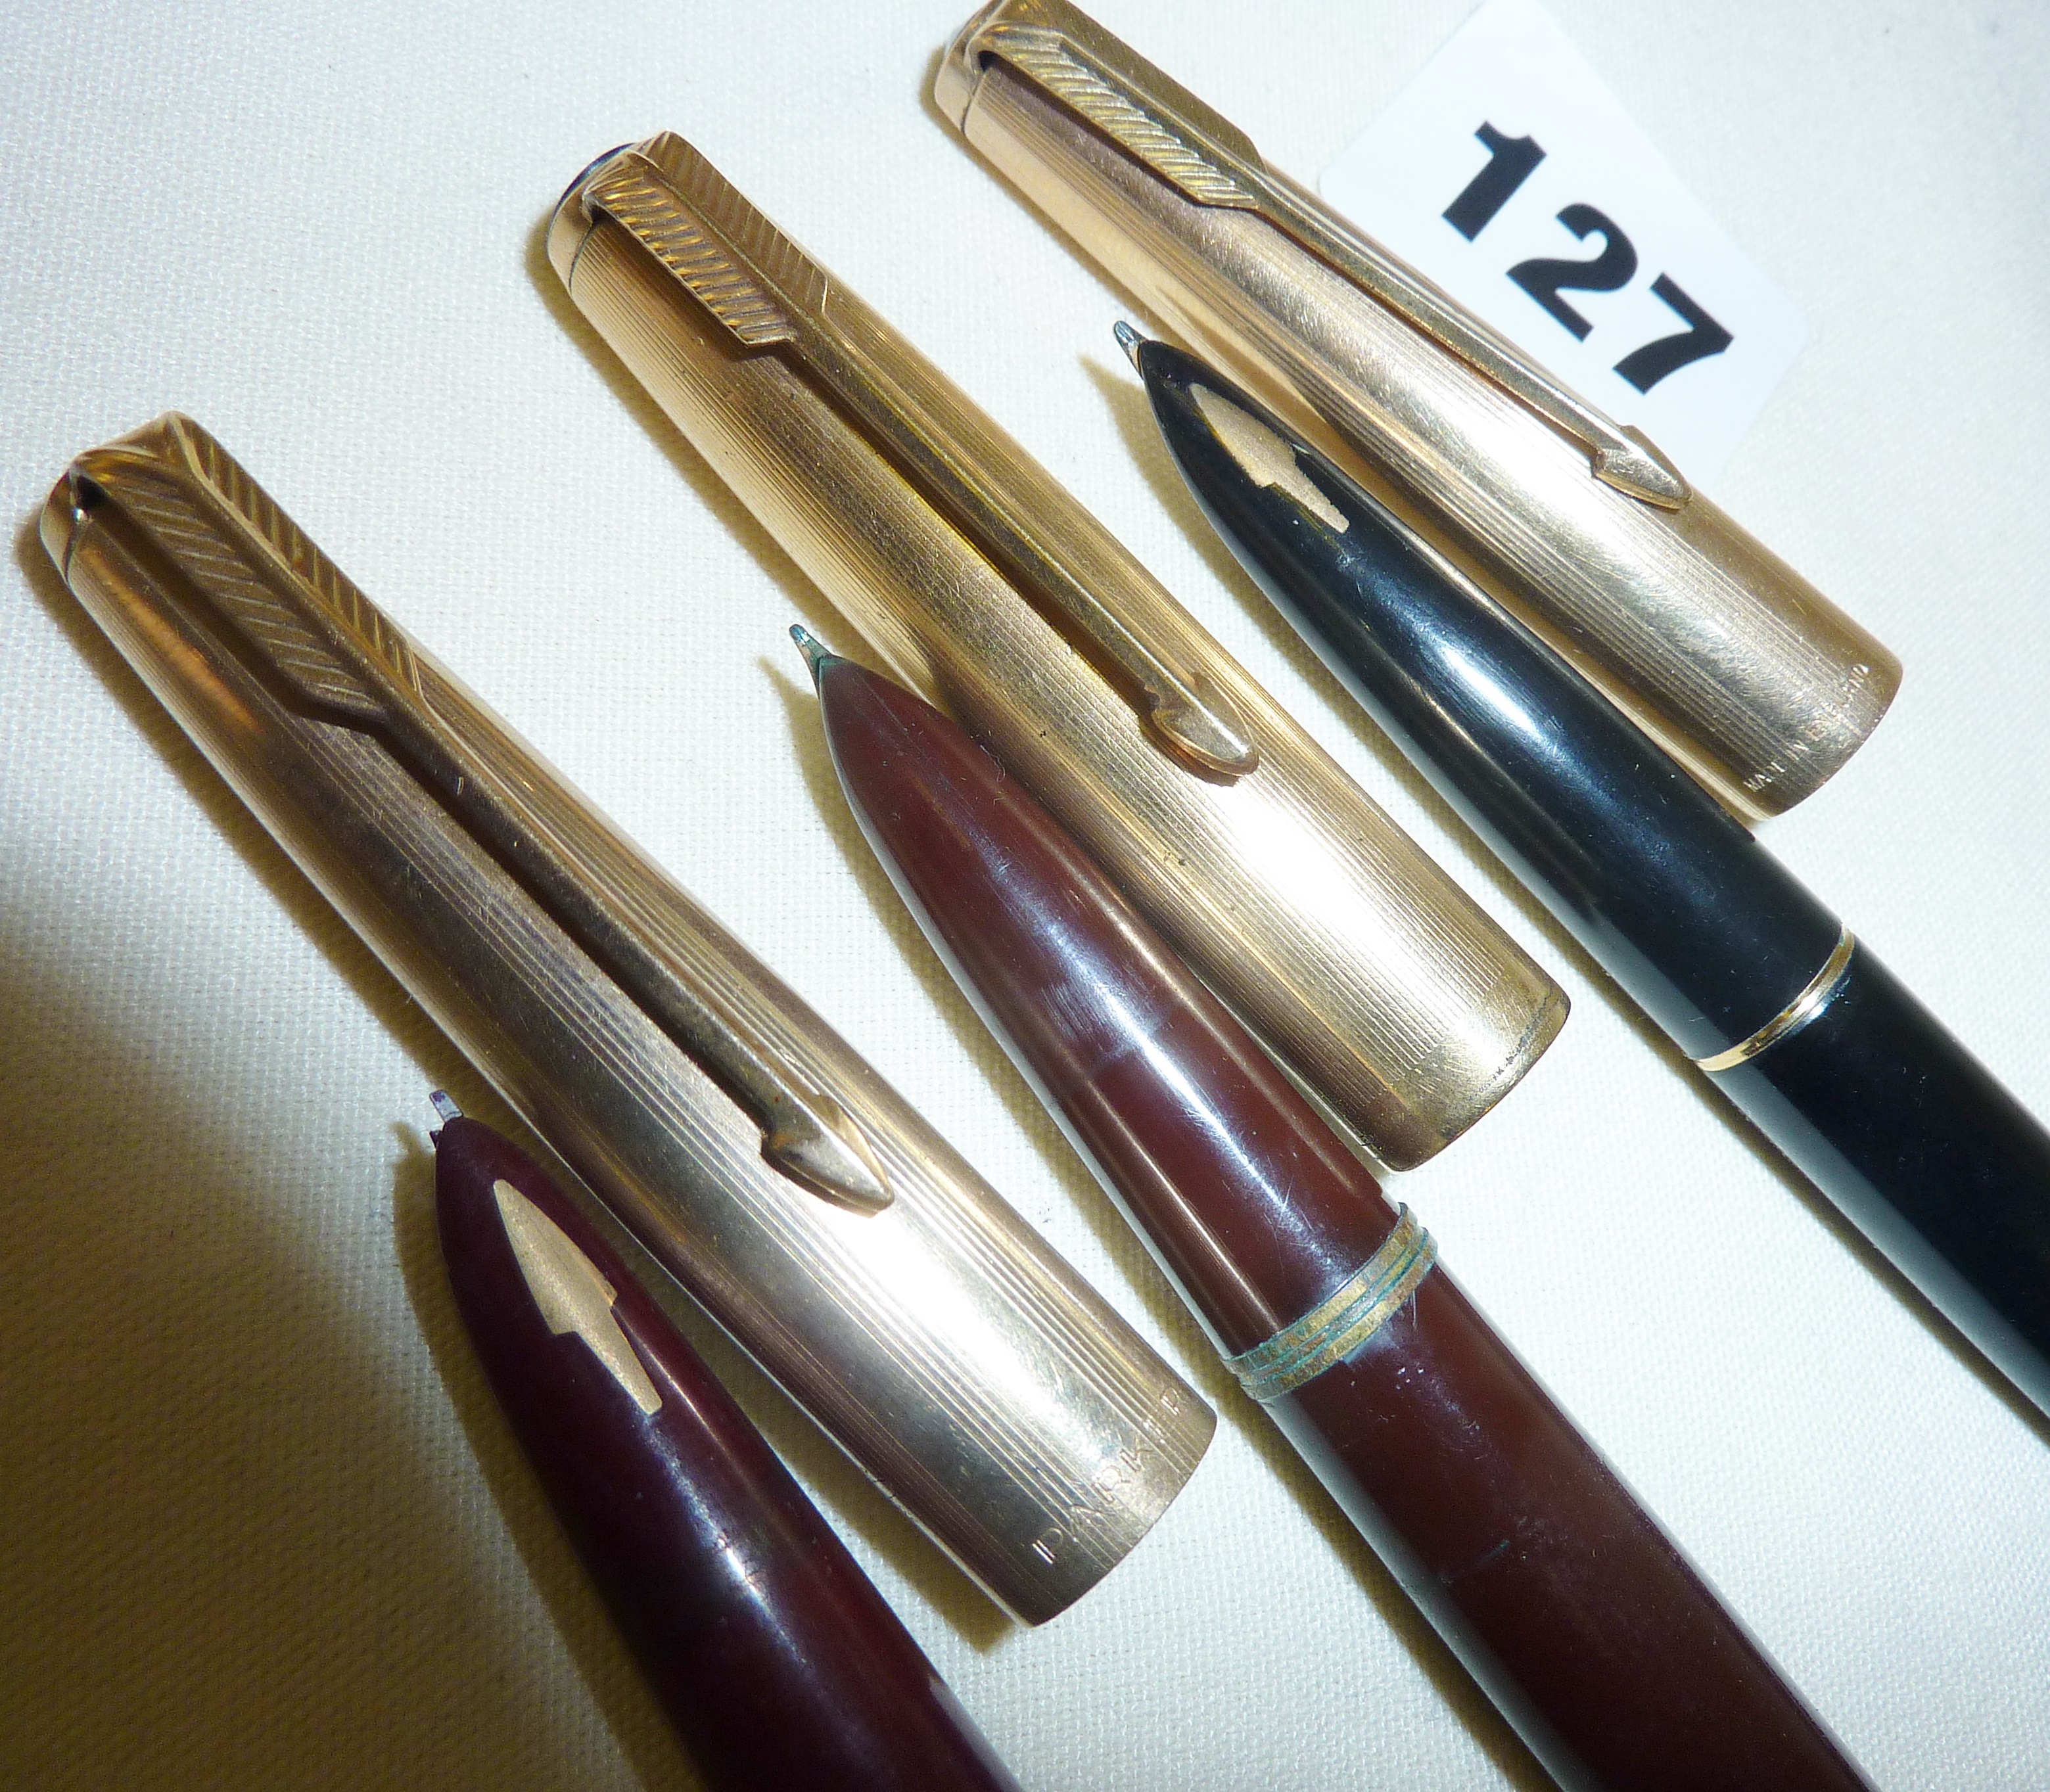 Two Parker 61 fountain pens, and another 51 Vacumatic, all with gold nibs and gold filled caps - Image 2 of 2